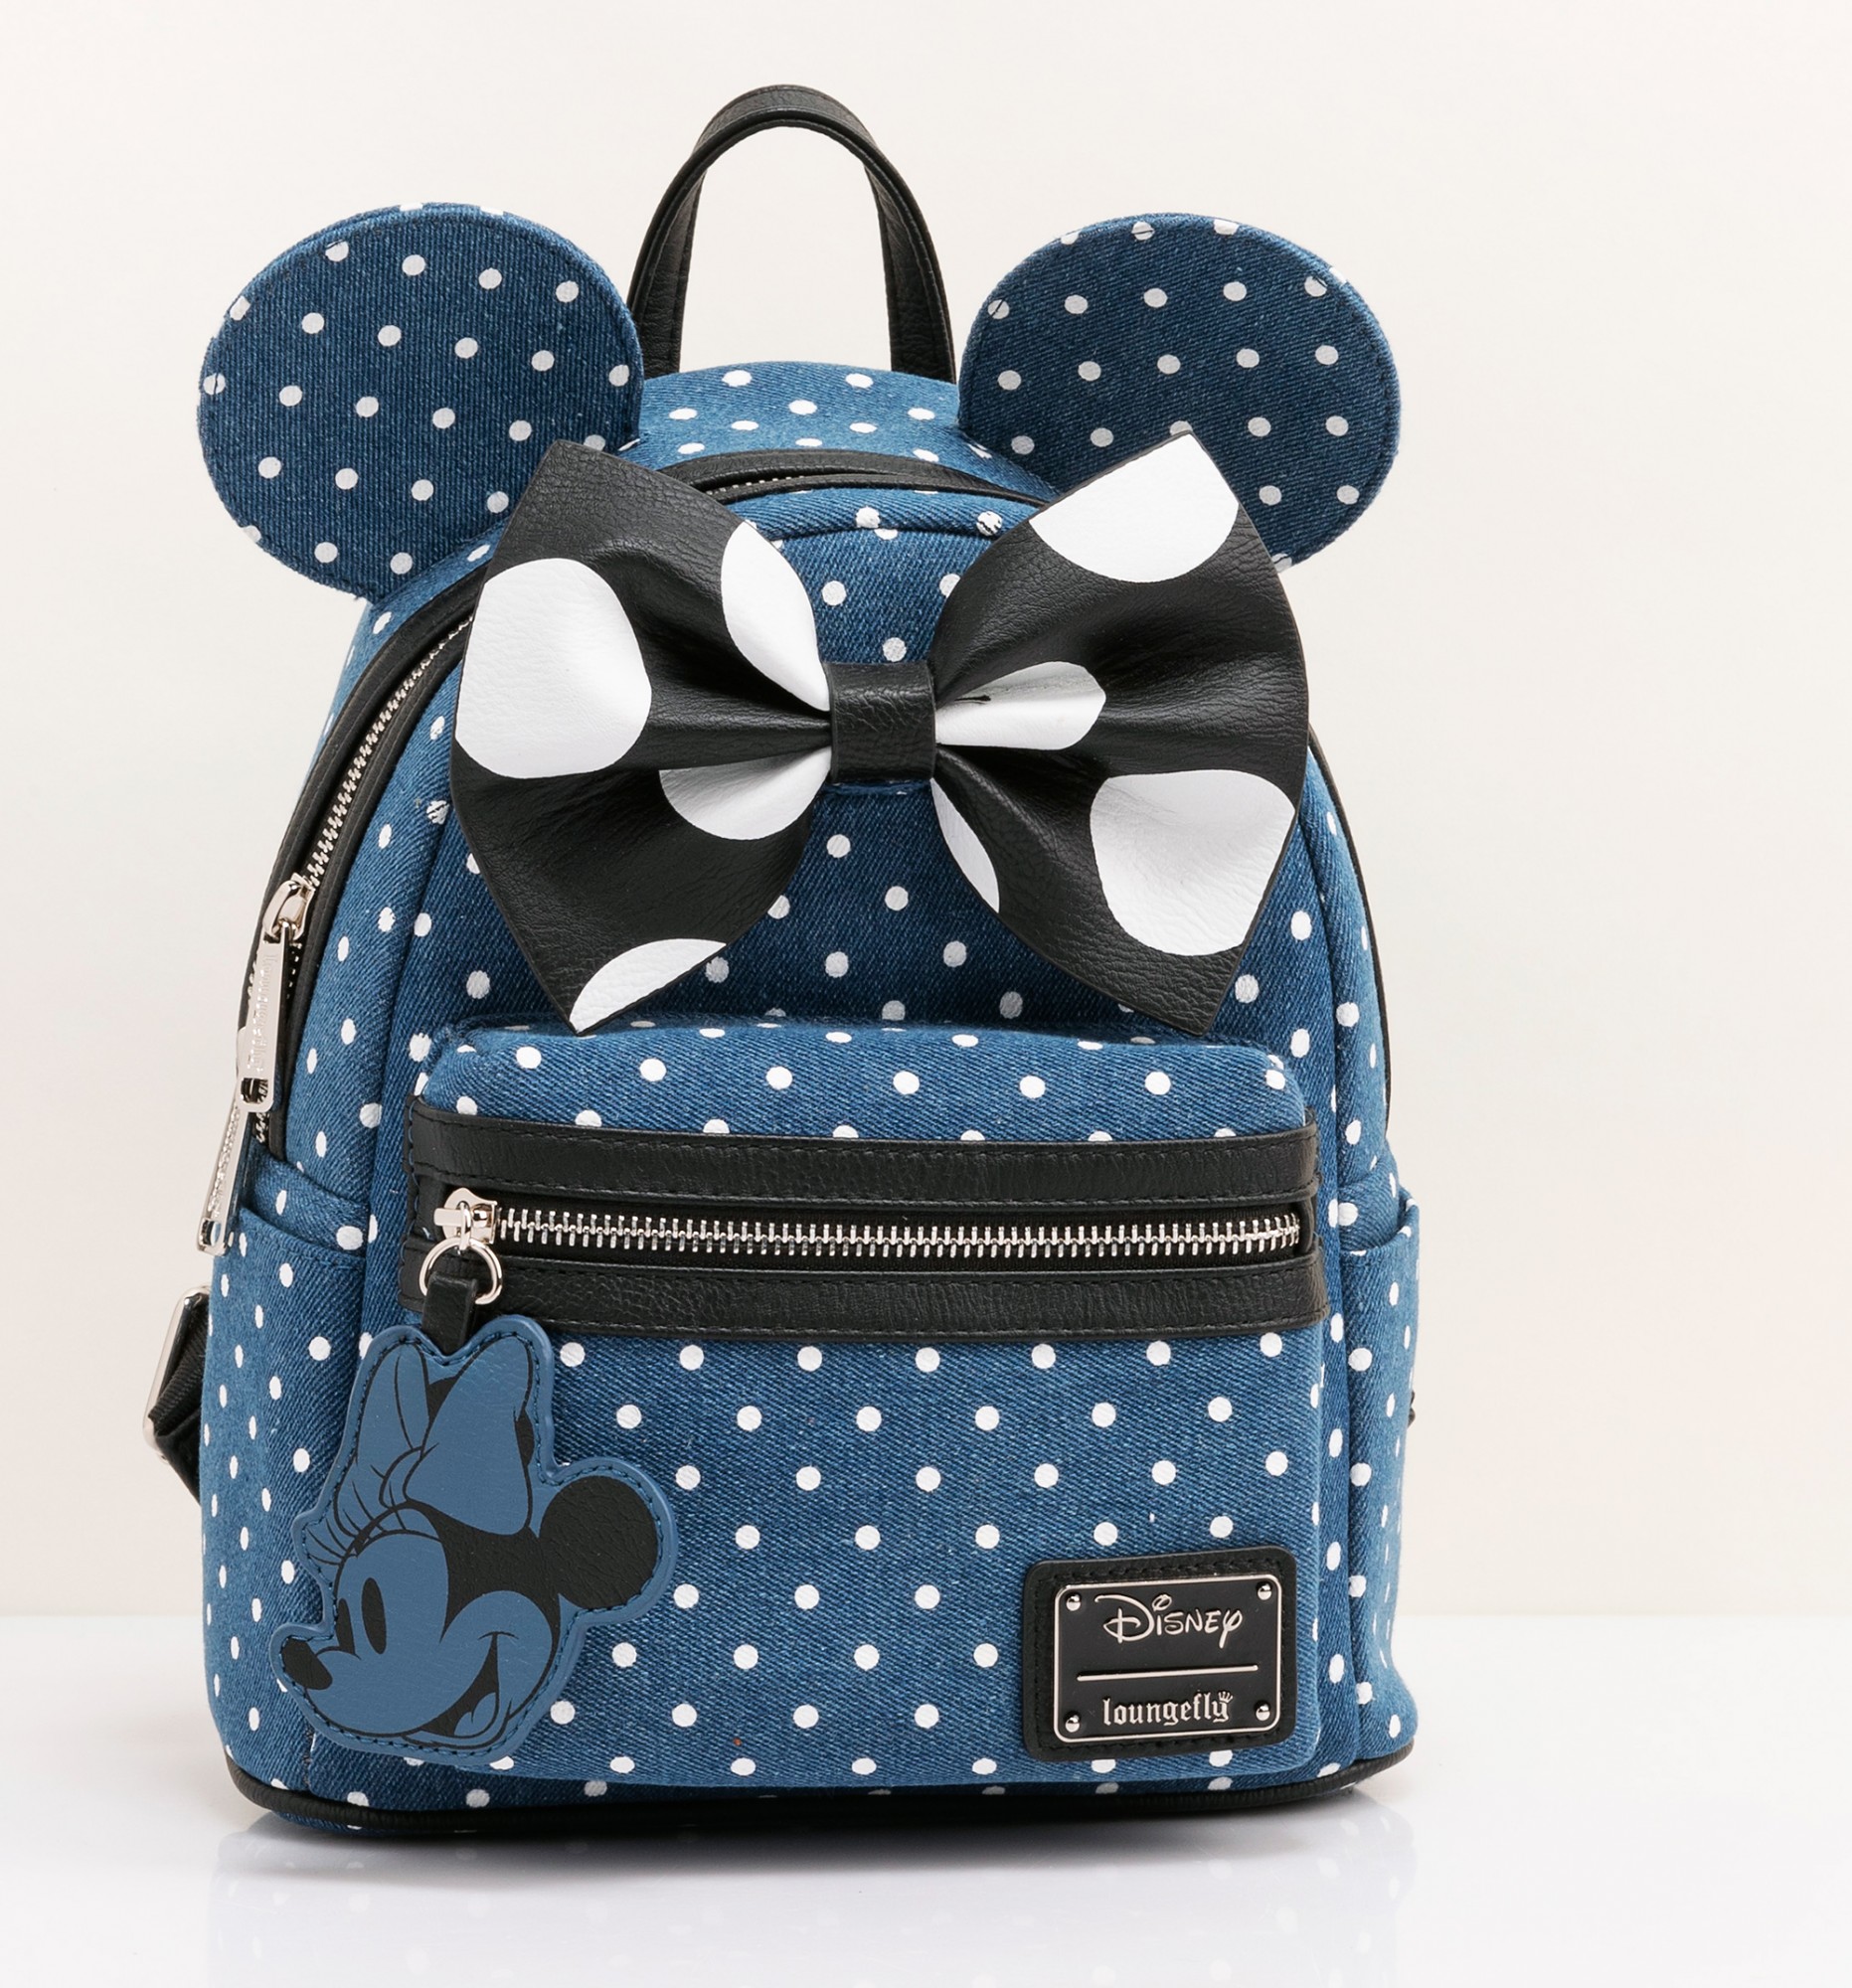 Loungefly Disney Minnie Mouse Denim Backpack